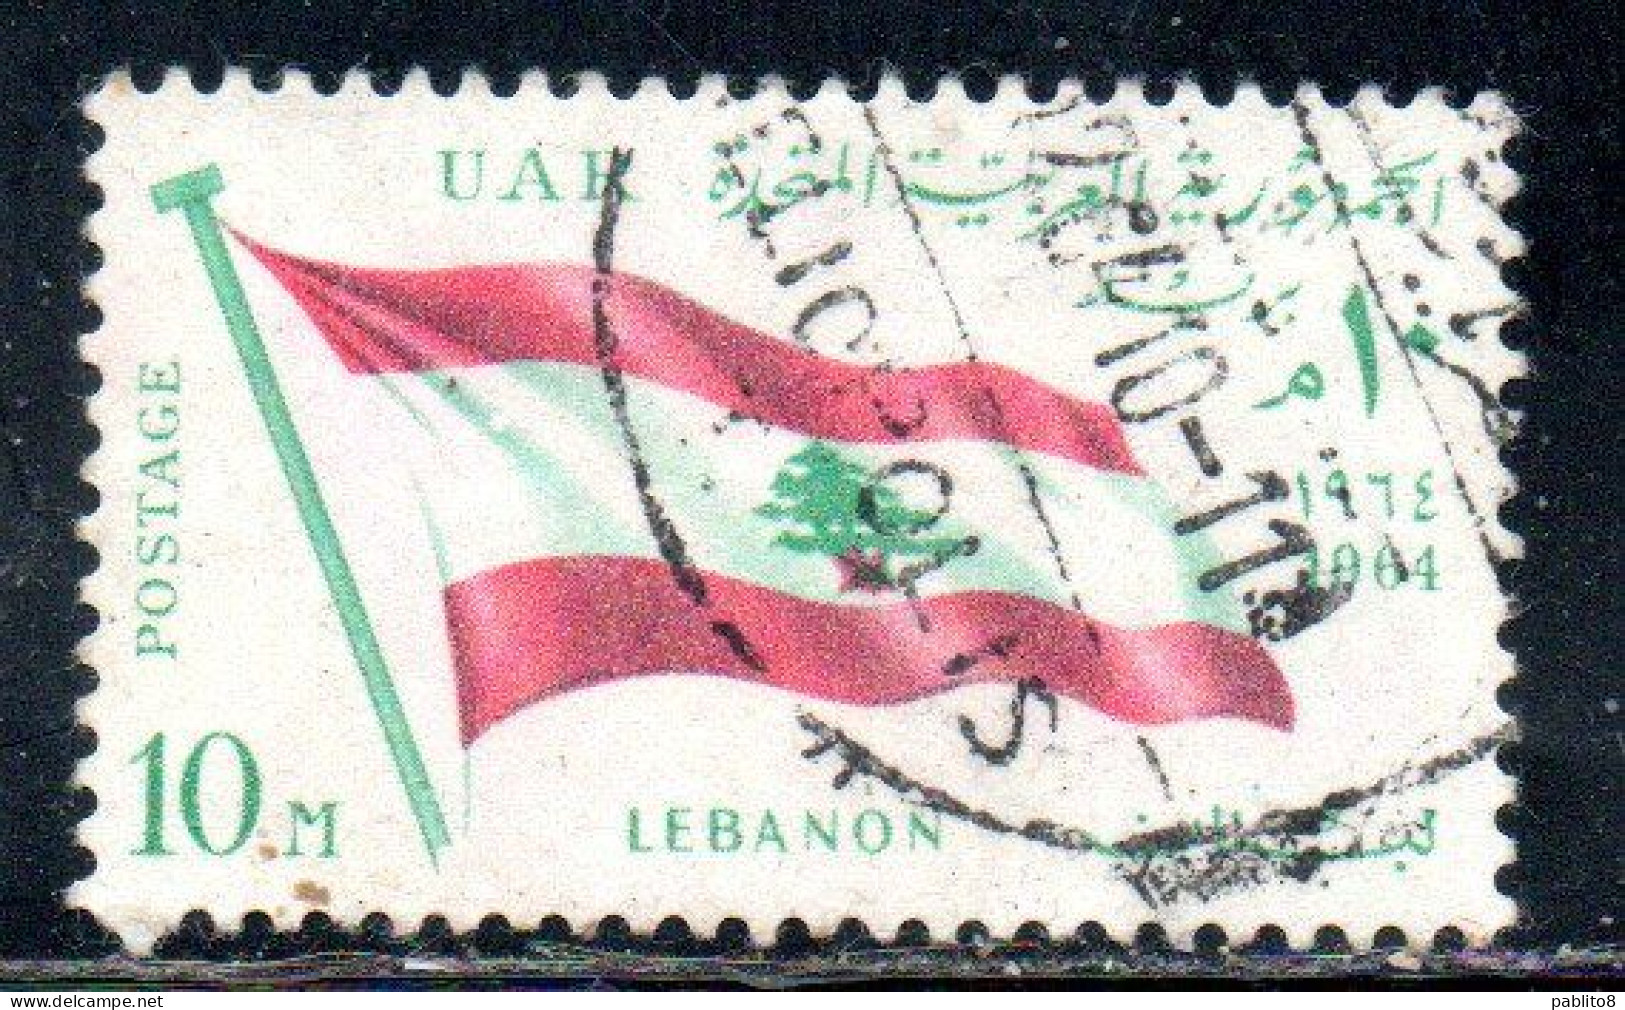 UAR EGYPT EGITTO 1964 SECOND MEETING OF HEADS STATE ARAB LEAGUE FLAG OF LEBANON 10m USED USATO OBLITERE' - Used Stamps